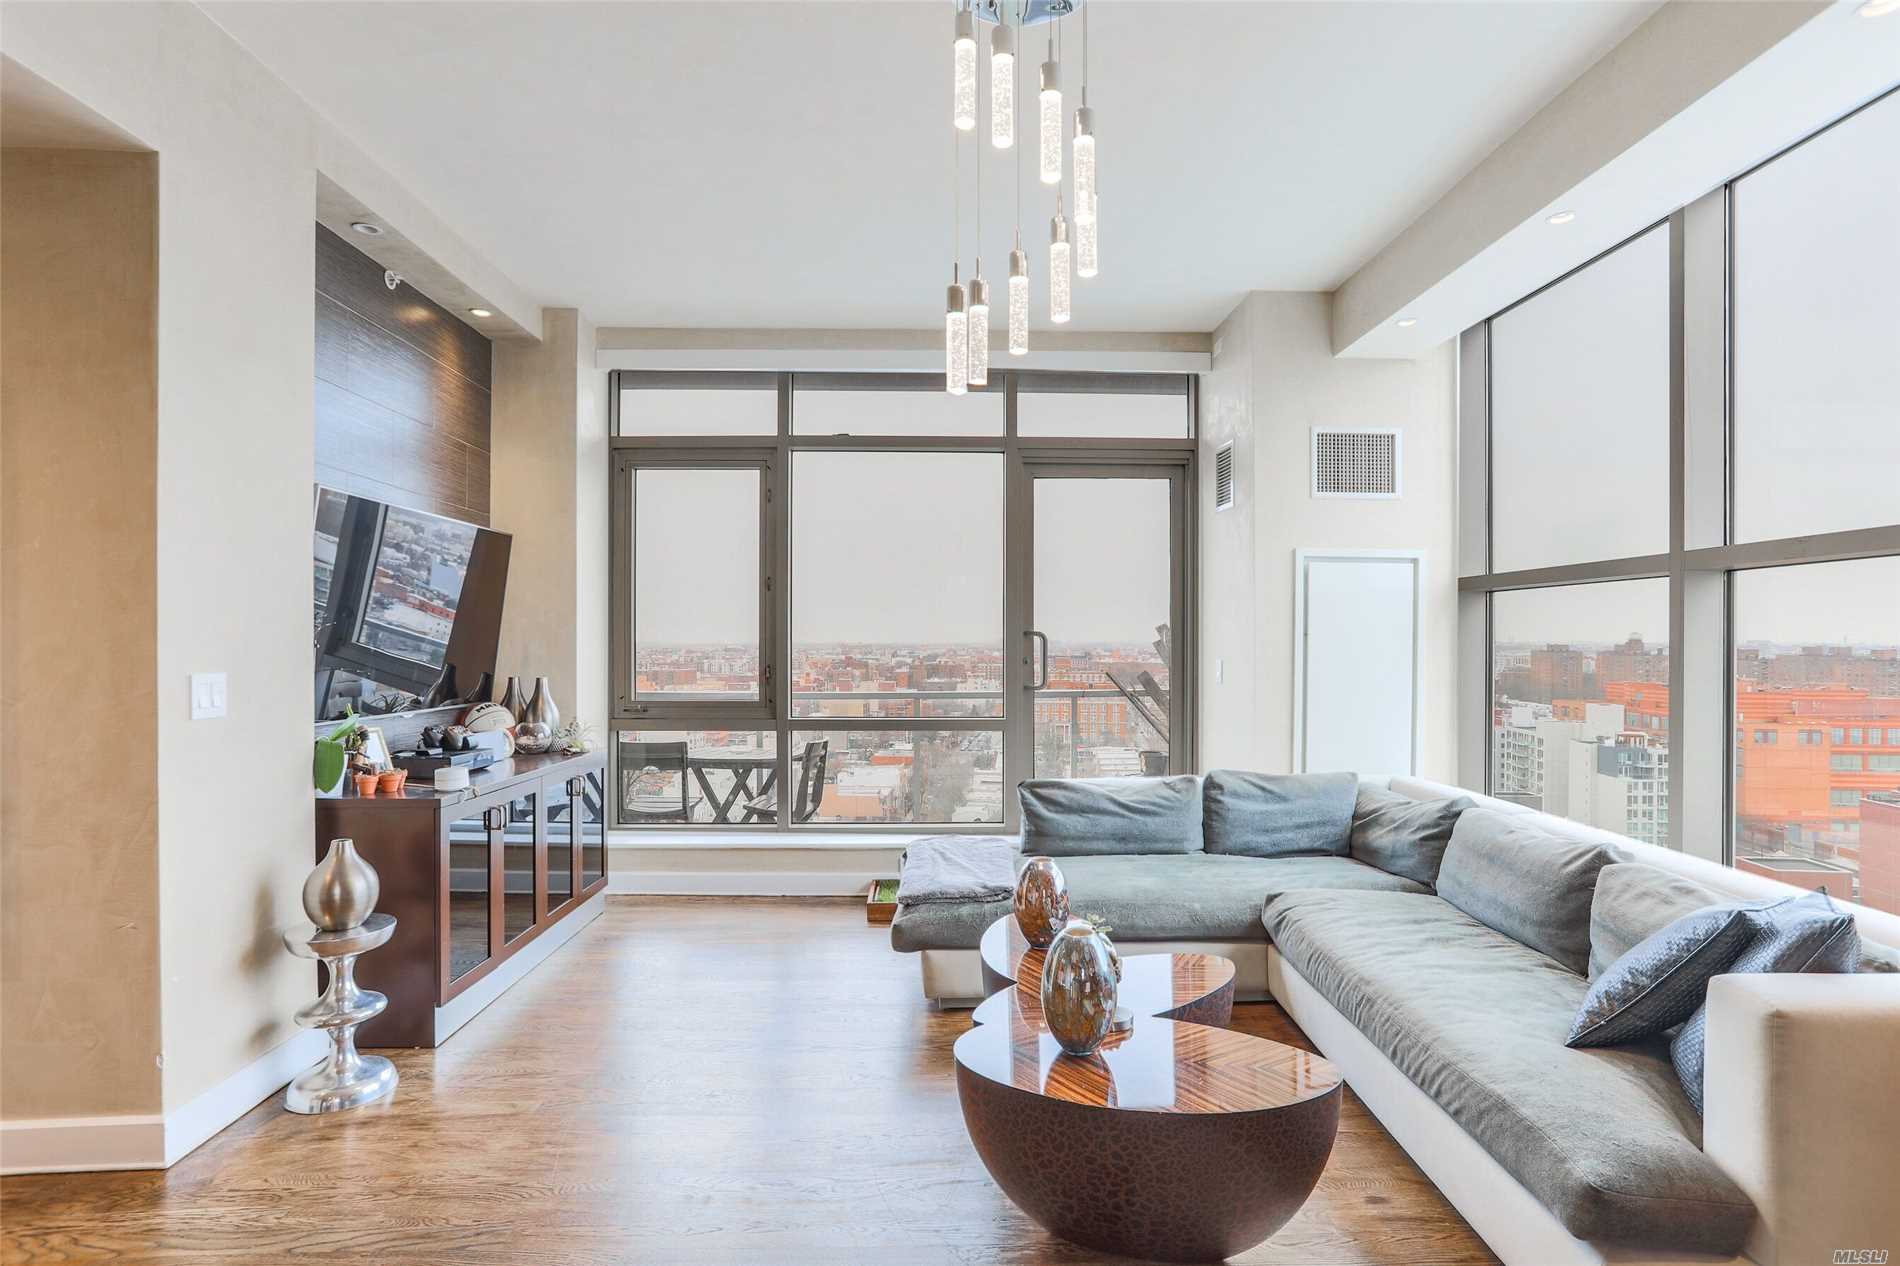 Gorgeous Two Bedroom Unit W/ A Balcony & 3 Parking Spots. Amenities Include Full-Time Doorman, Fitness Center, Landscaped Courtyard W/ Grilling Area, Bike Rack & Garage Parking. Steps From The New Ferry W/ Stops To Manhattan & Brooklyn. Walking Distance To Socrates Sculpture Park, Astoria Park, Noguchi Museum, & Costco. Unit Features A Gorgeous Kitchen W/ Stainless Steel Appliances, Hardwood Floors, Washer/Dryer In The Unit, Central Air & Heating, And A Balcony. Tax Abatement Until 2025